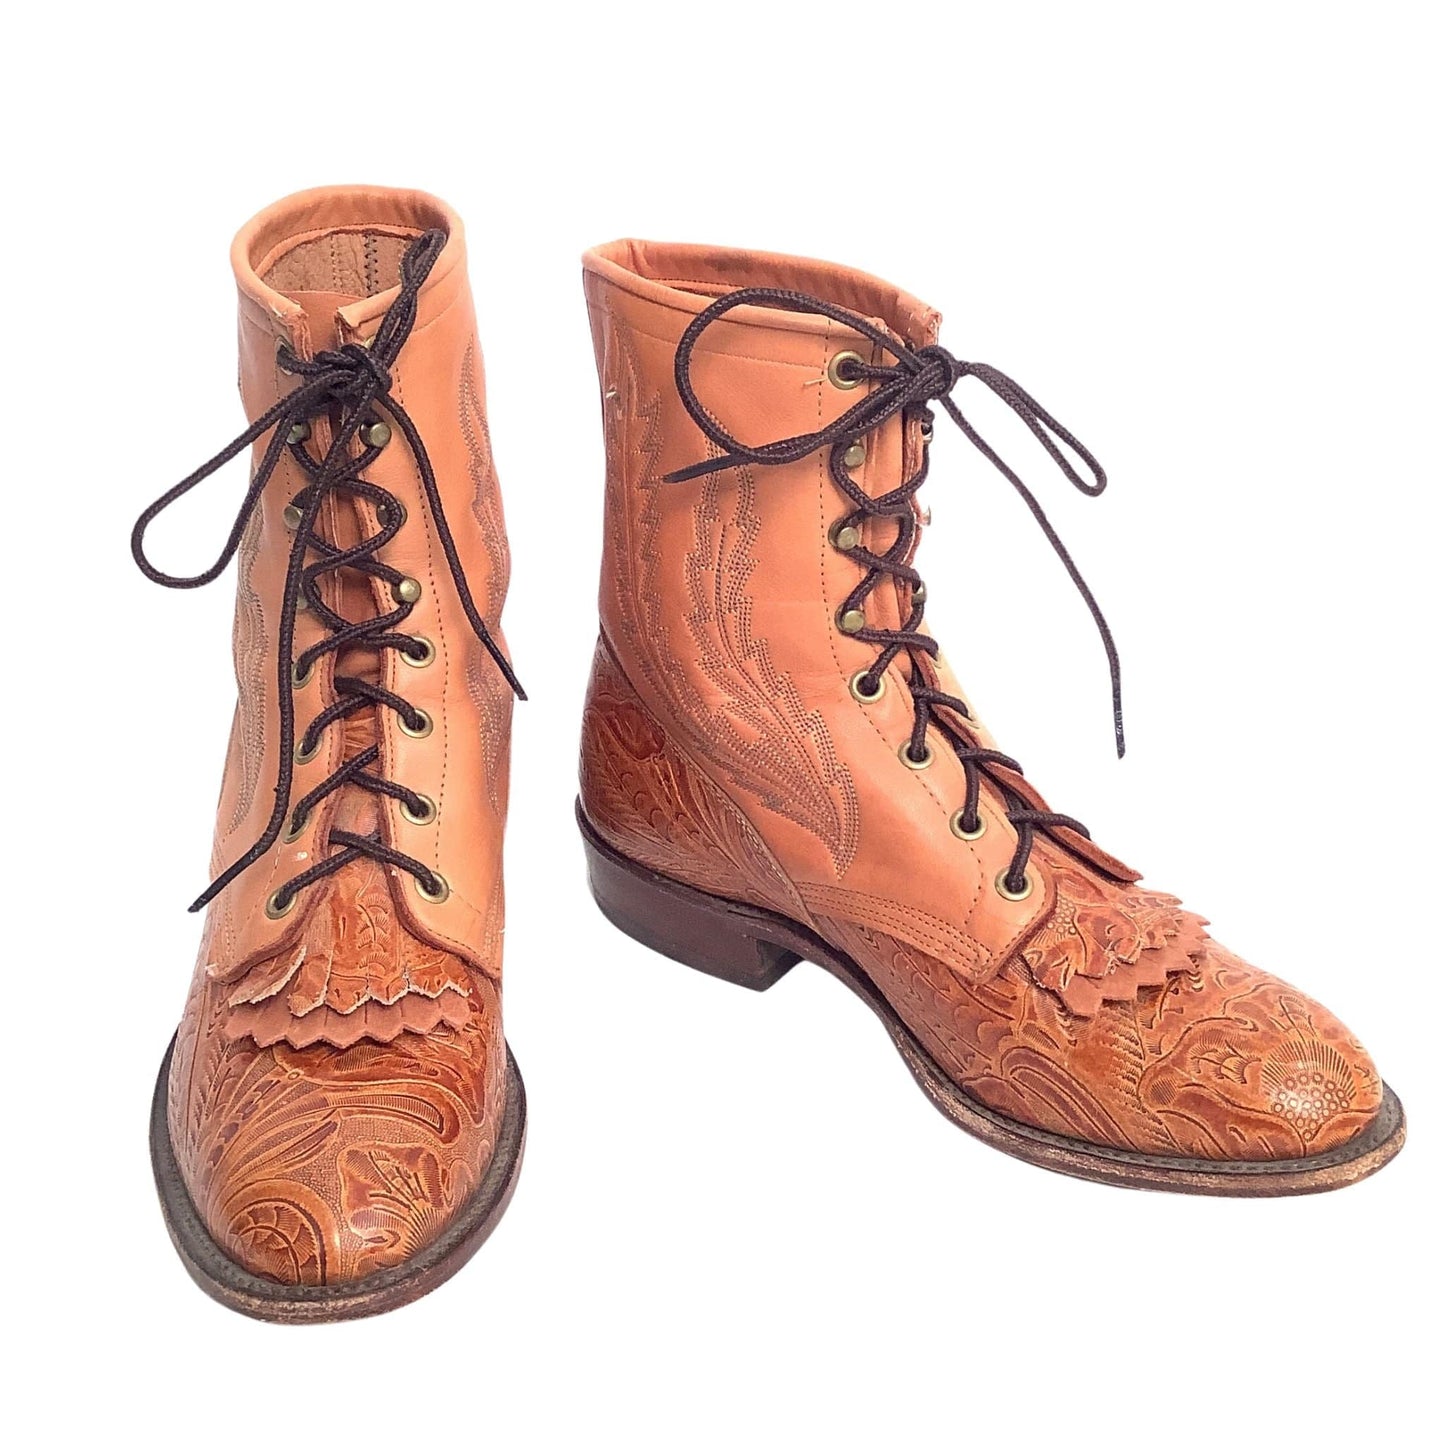 Larry Mahan Tooled Boots 8.5 / Tan / Vintage 1990s